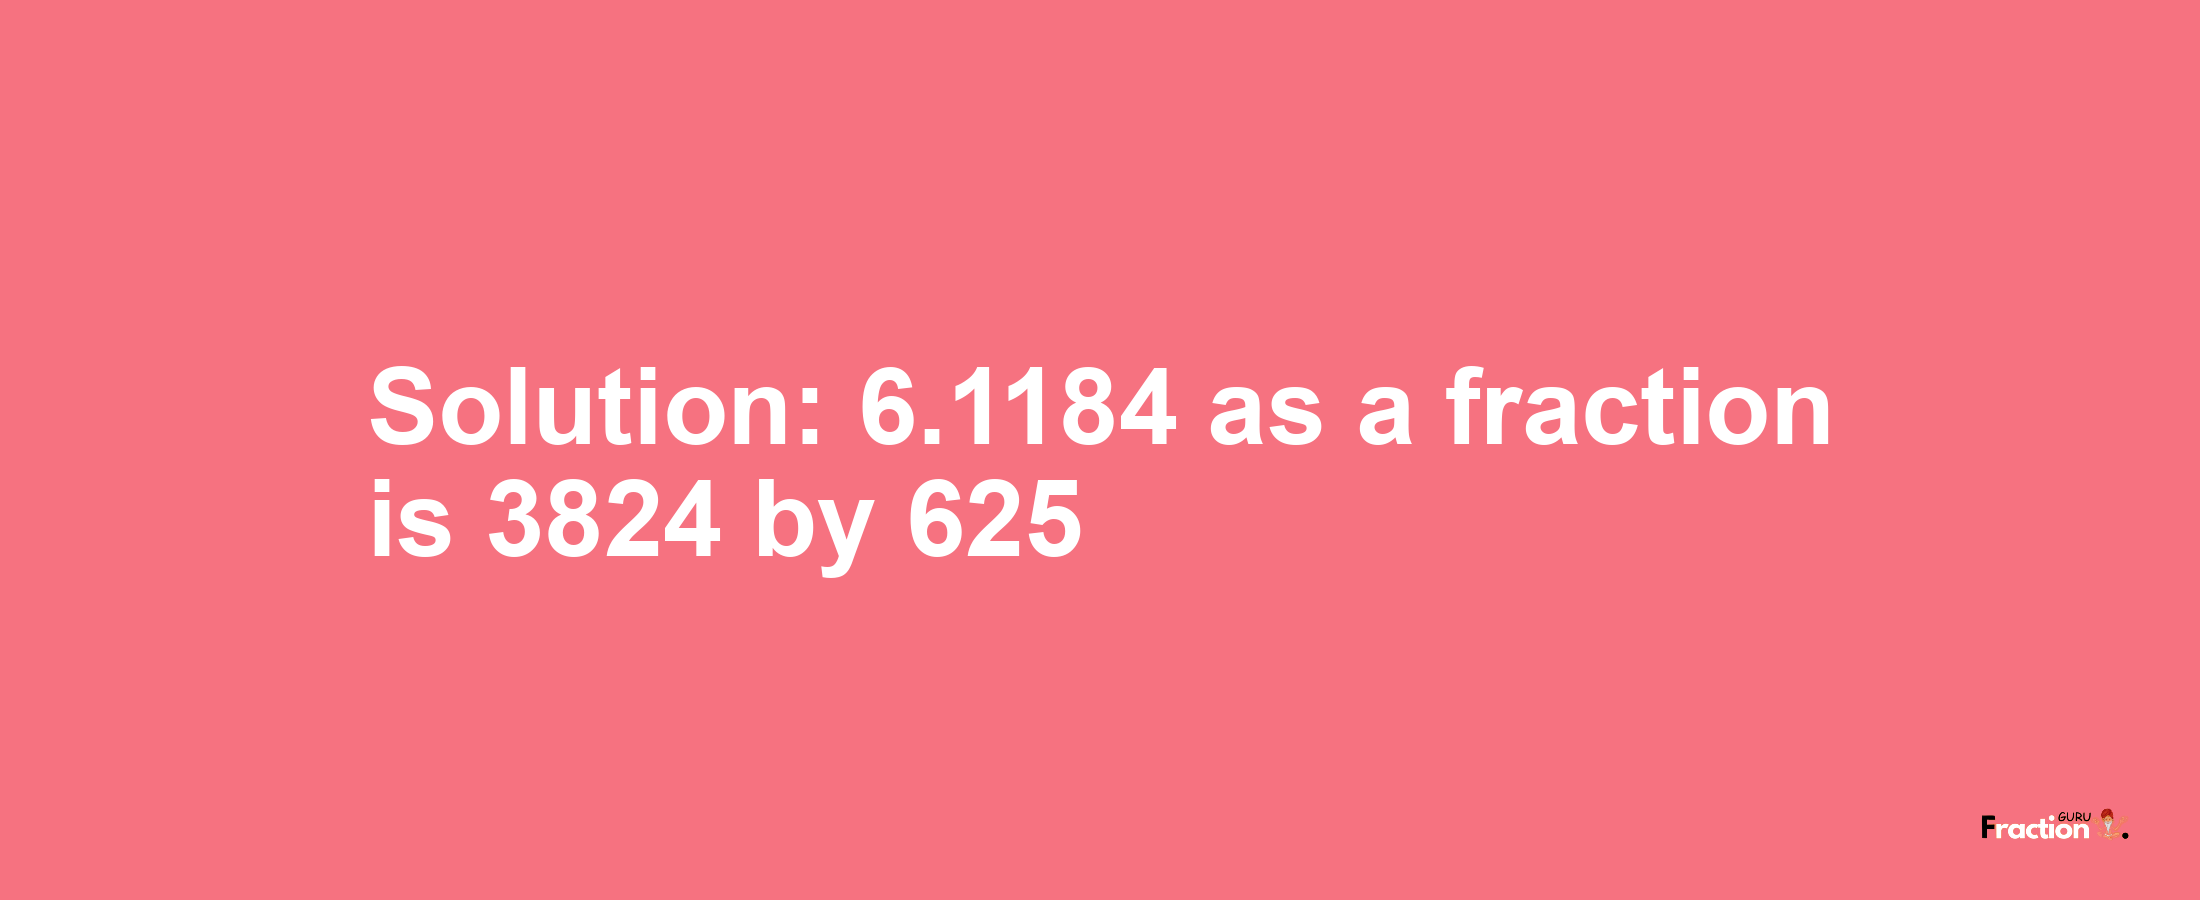 Solution:6.1184 as a fraction is 3824/625